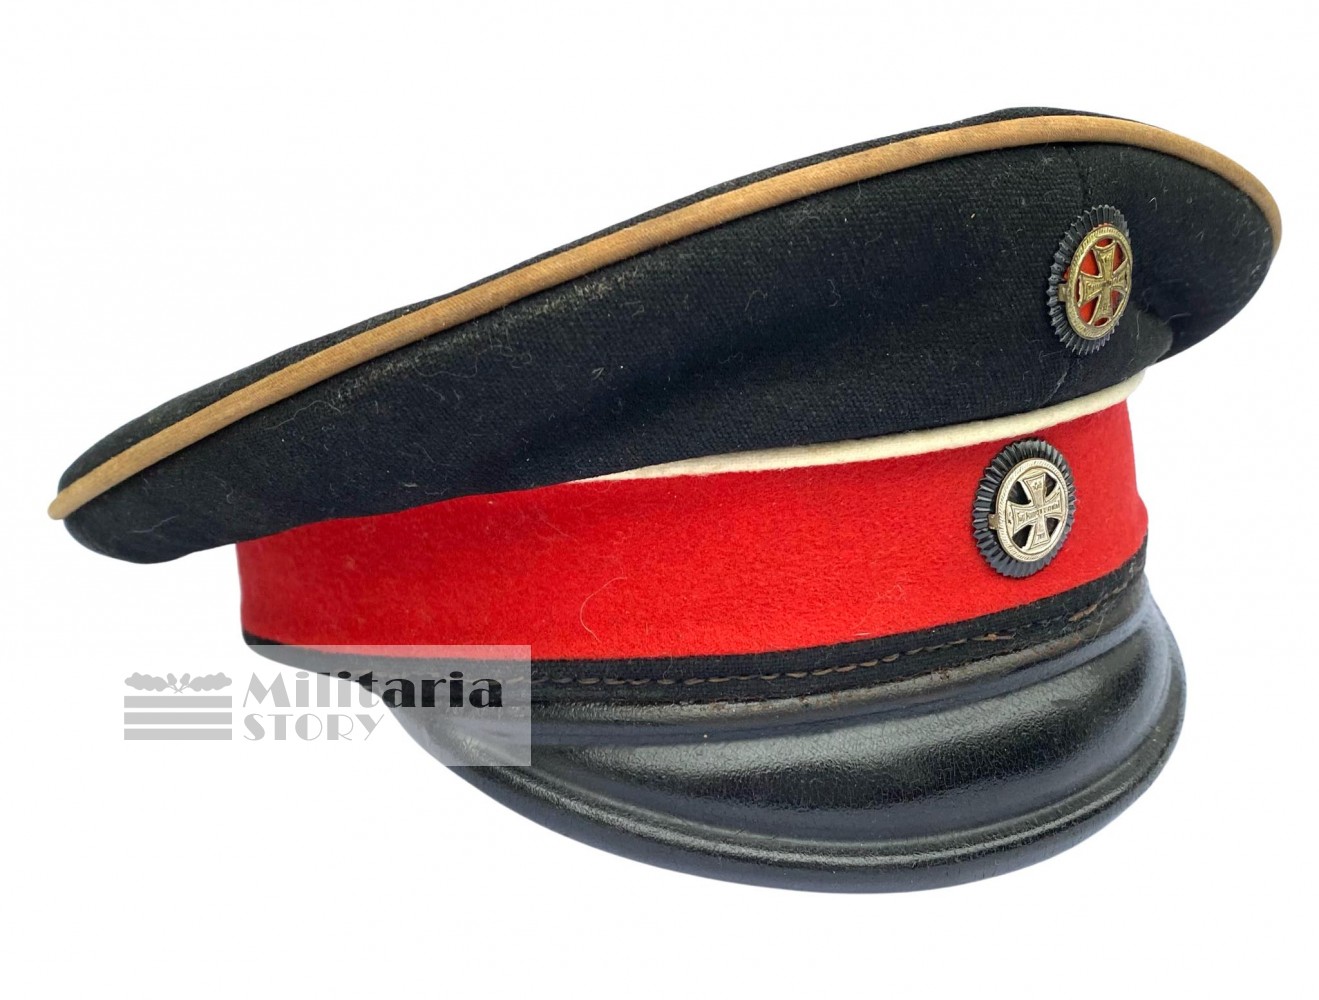 WWI Cap of the Prussian Landwehr - WWI Cap of the Prussian Landwehr: Vintage German Headgear